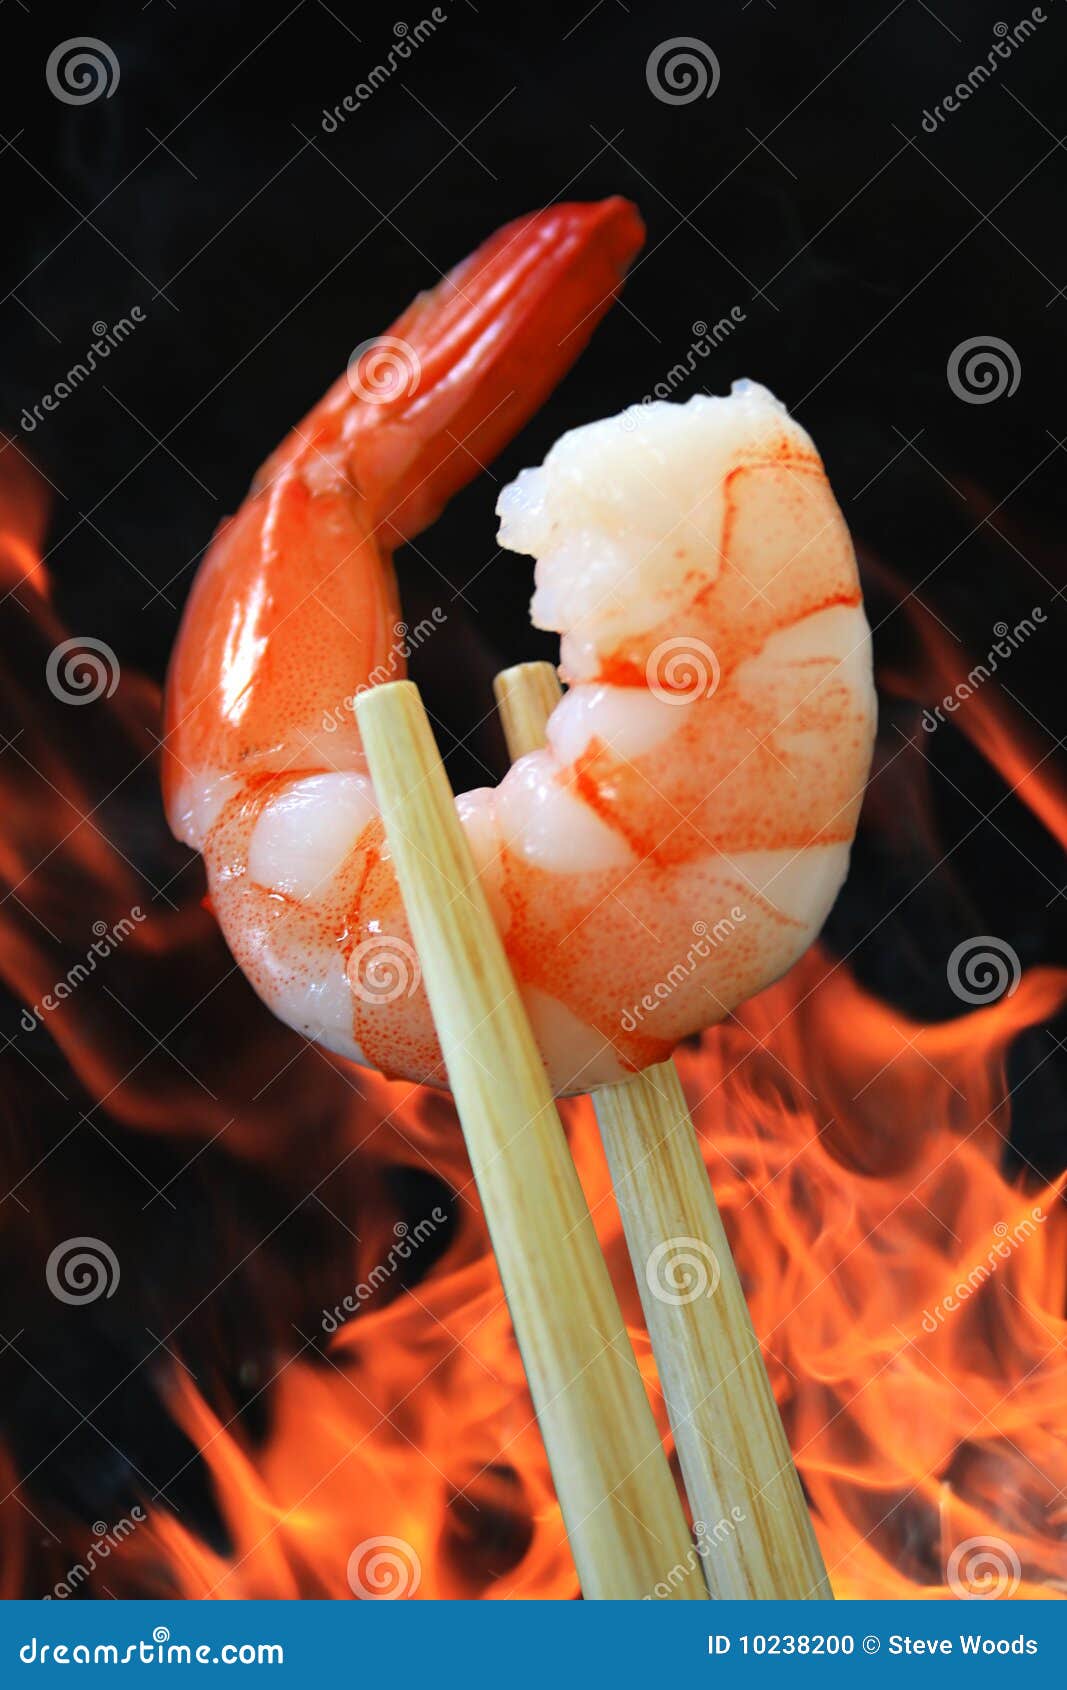 Flamed Prawn stock photo. Image of chopsticks, grill - 10238200